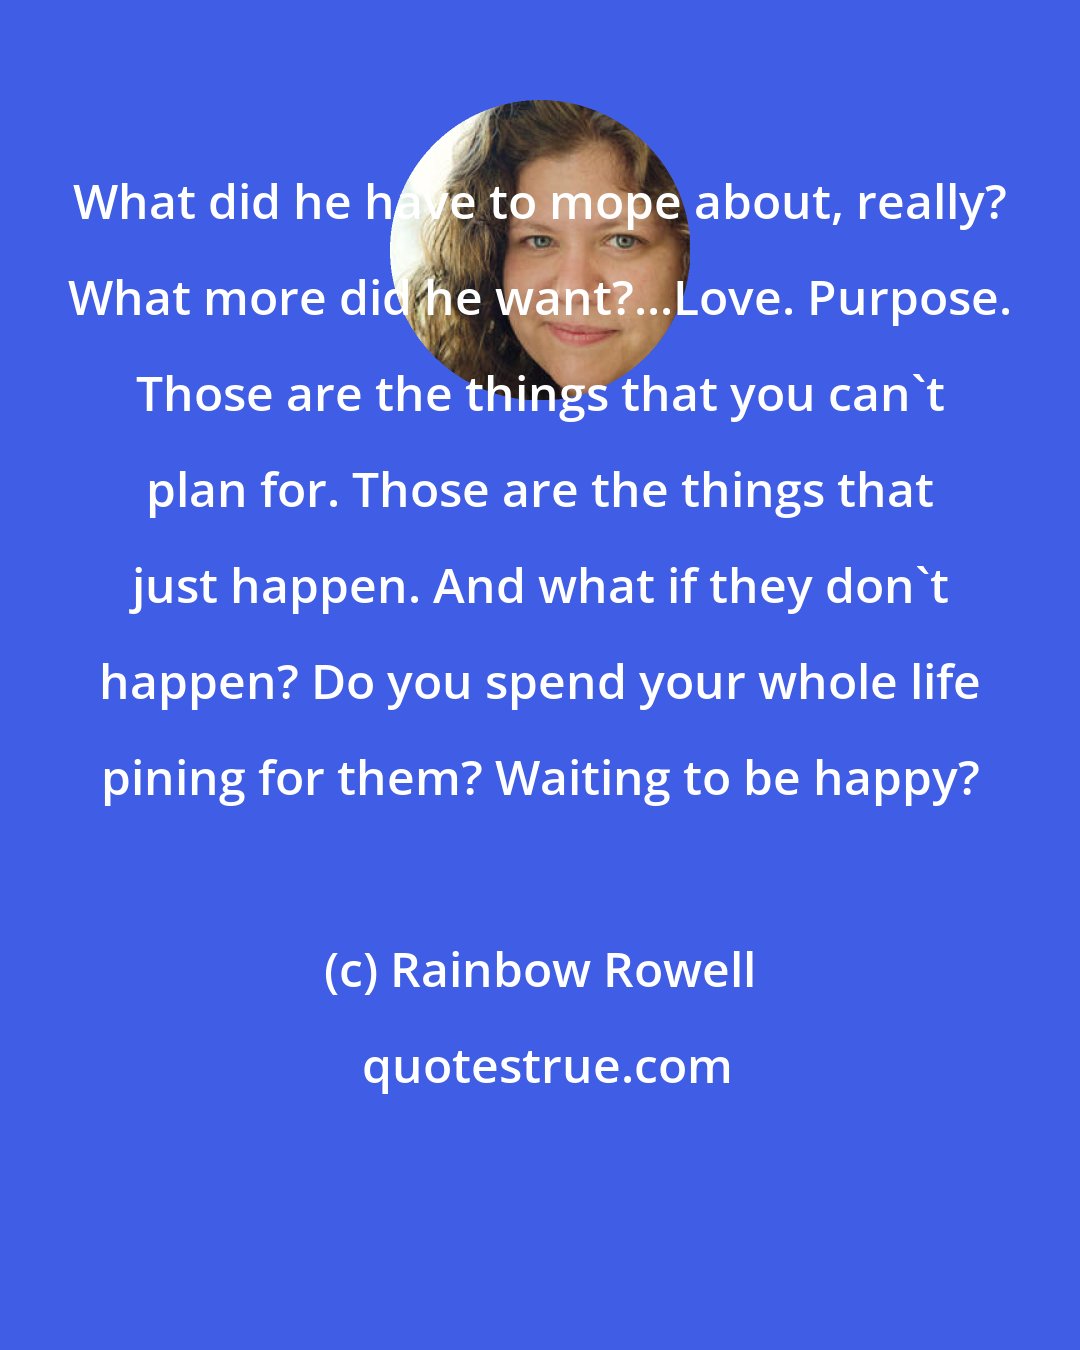 Rainbow Rowell: What did he have to mope about, really? What more did he want?...Love. Purpose. Those are the things that you can't plan for. Those are the things that just happen. And what if they don't happen? Do you spend your whole life pining for them? Waiting to be happy?